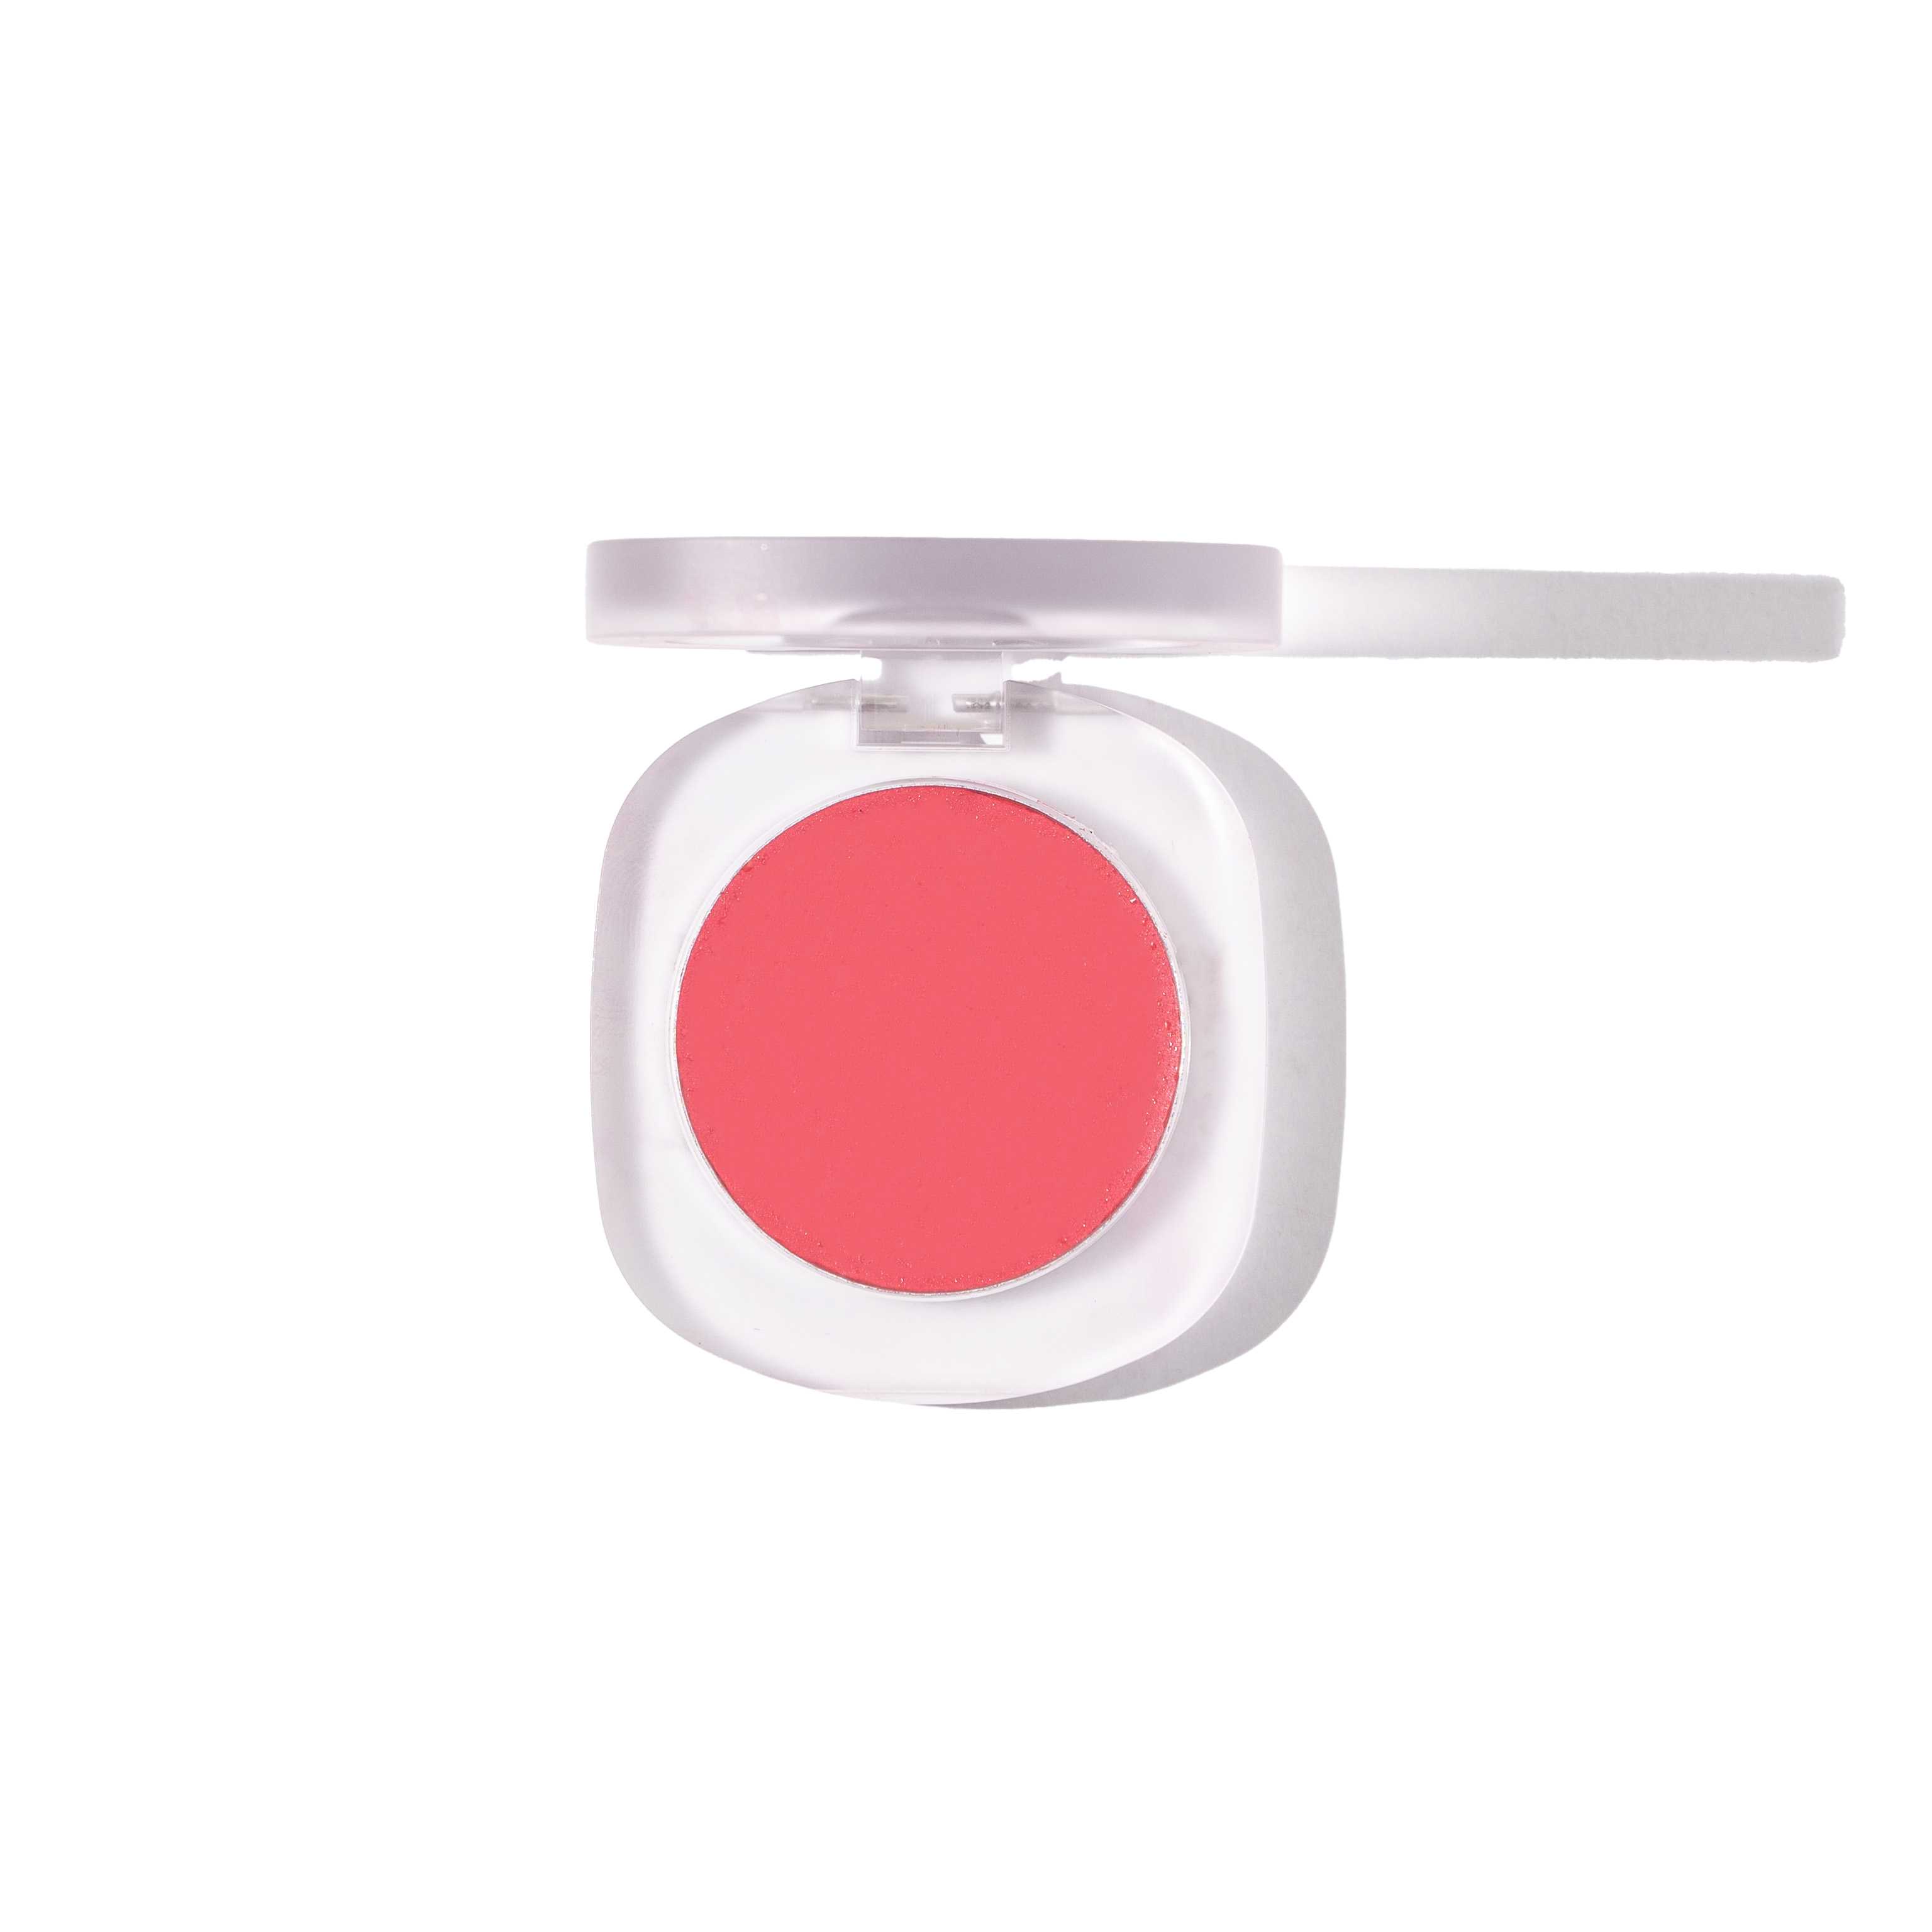 Two Peas in a Pod - Coral Pink Velvet Cream Magic Blush